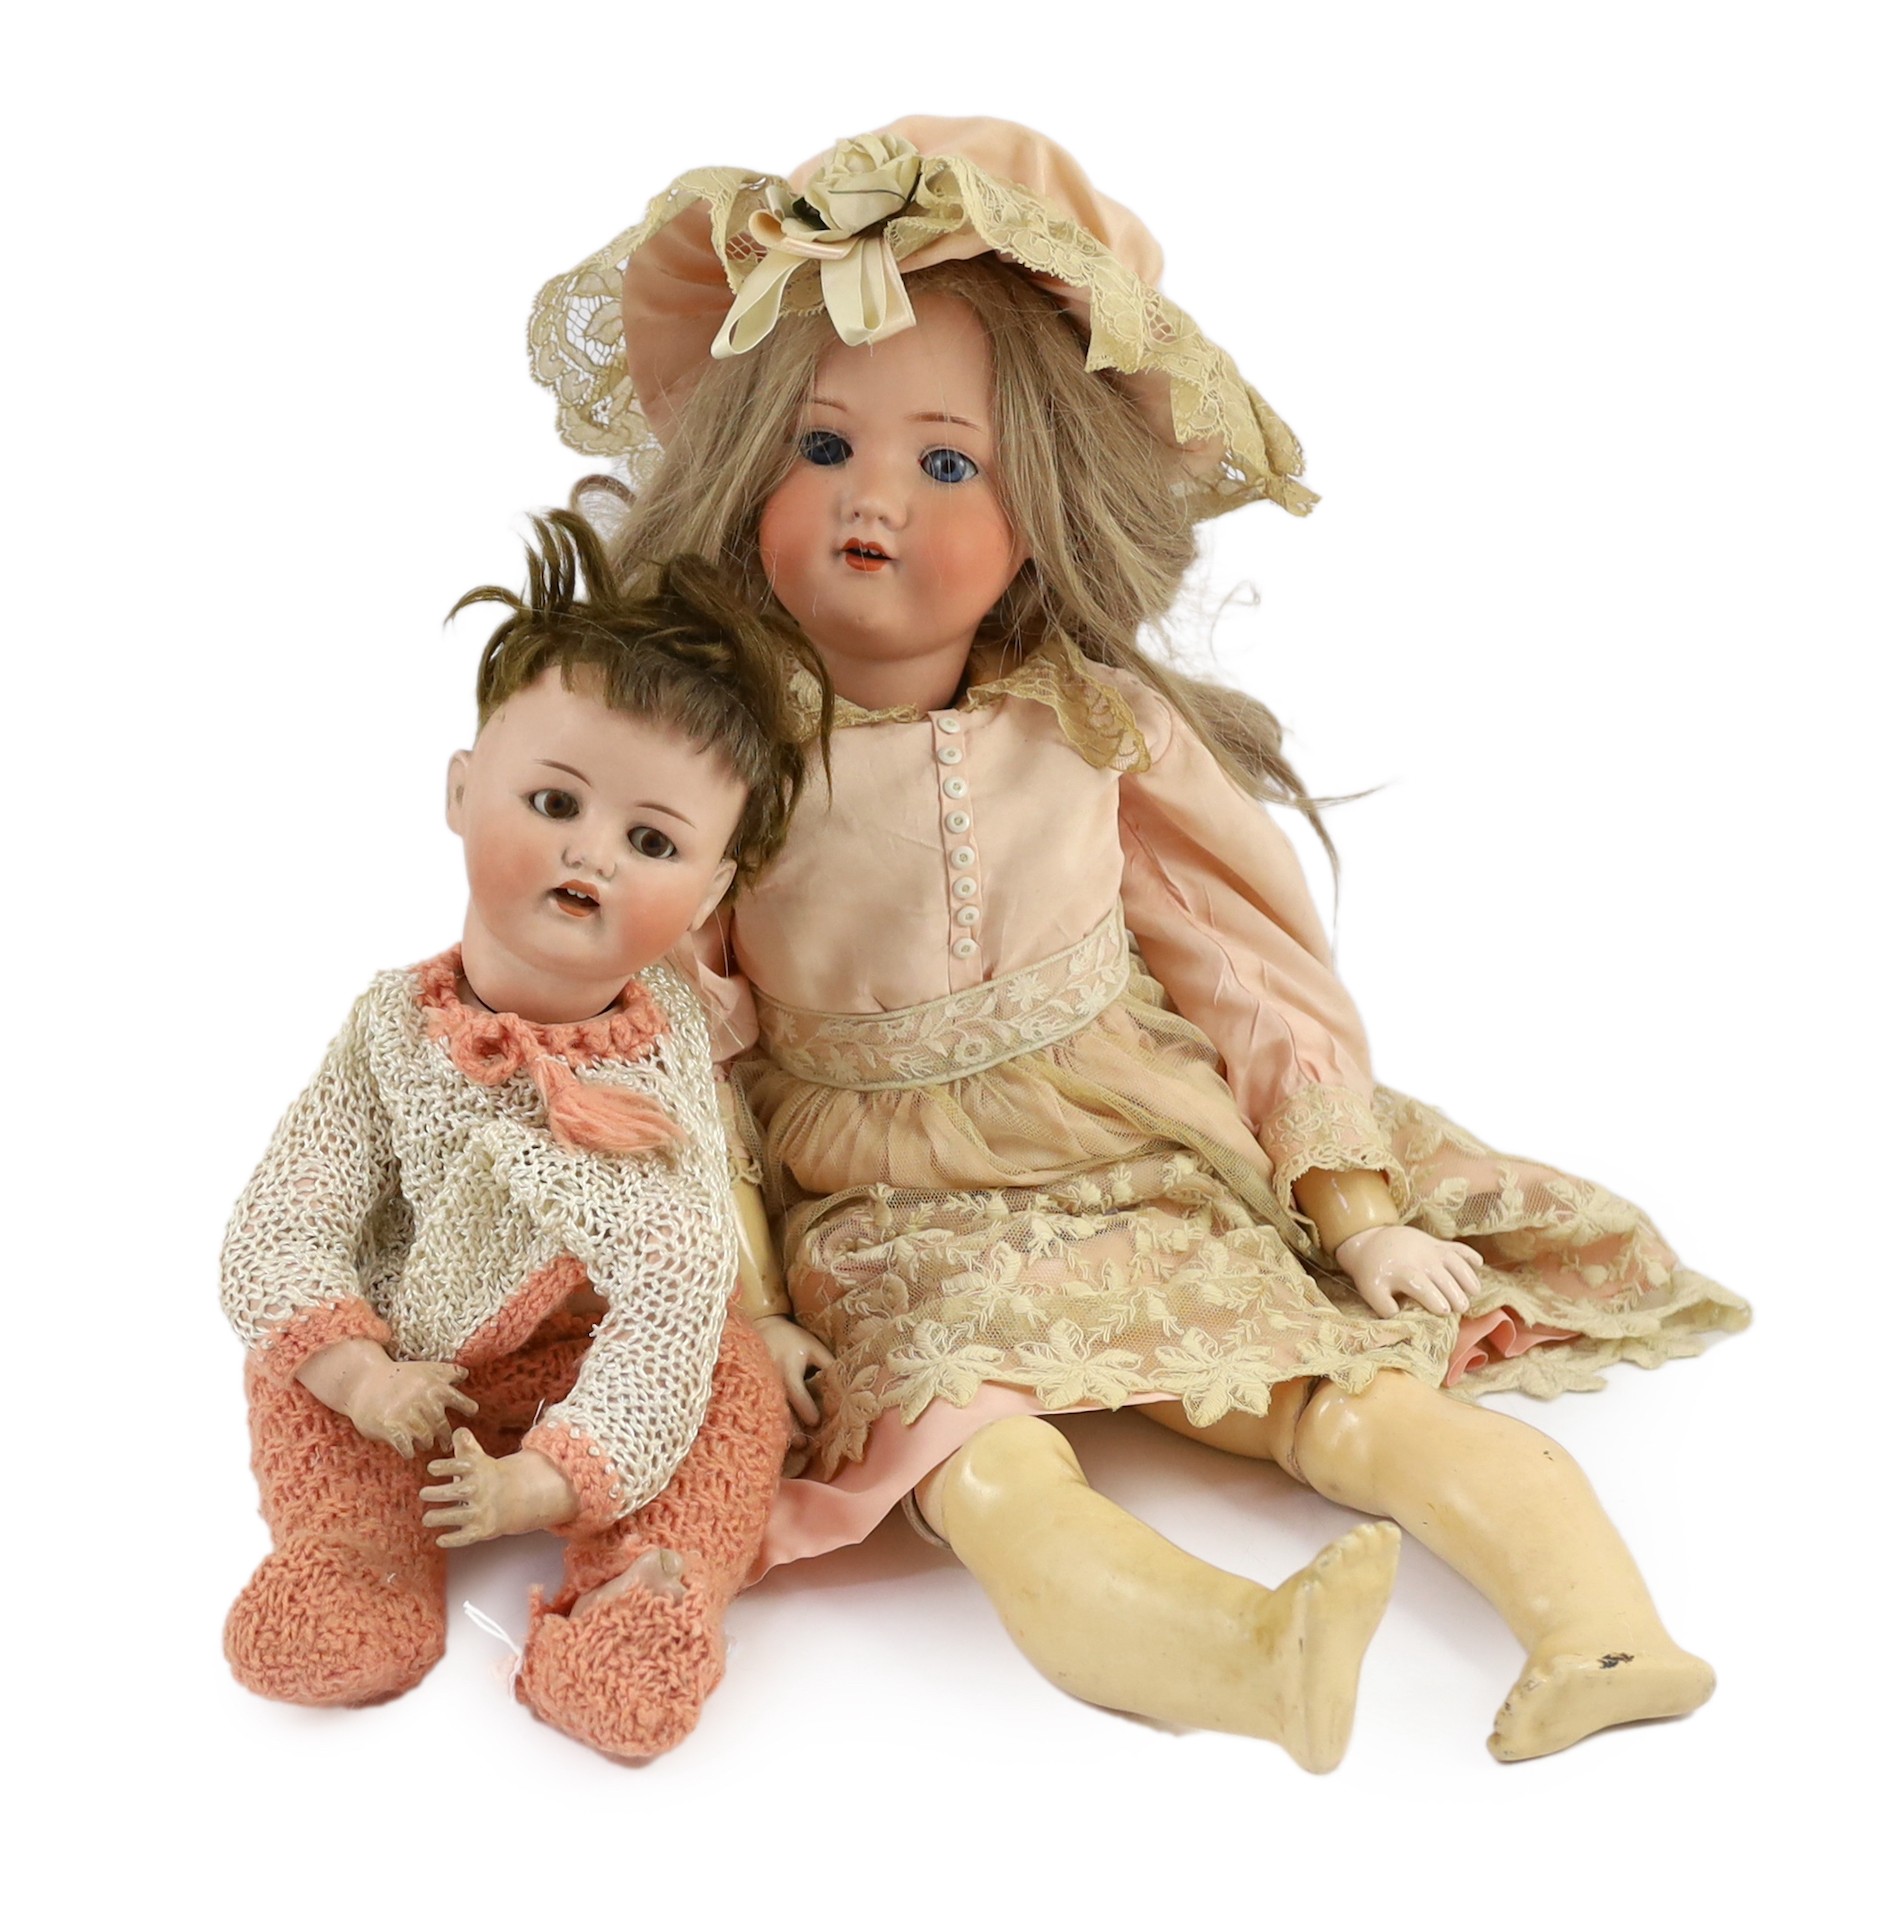 An Armand Marseille bisque doll, mould 390 with sleeping eyes and open mouth, jointed wood and composition body, cream and lace dress and matching bonnet, 22in., and a German Bebe Elite bisque doll                       